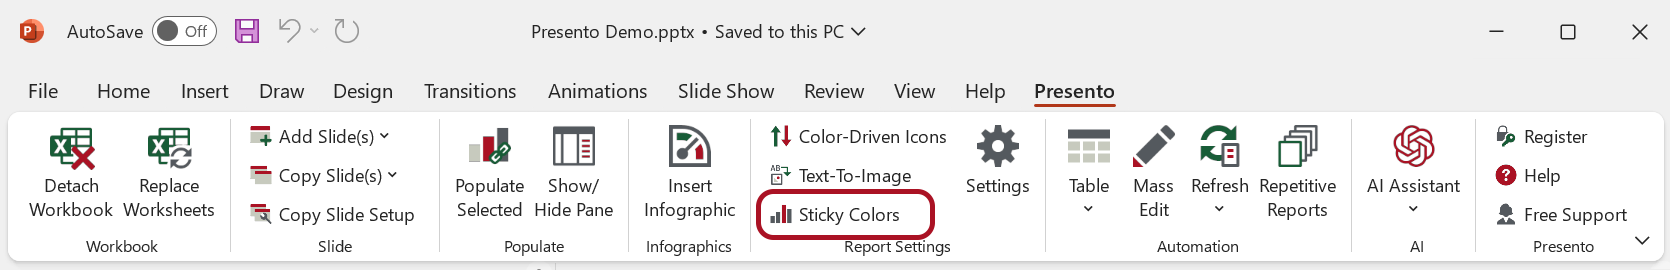 Sticky Colors in the Presento Ribbon Tab